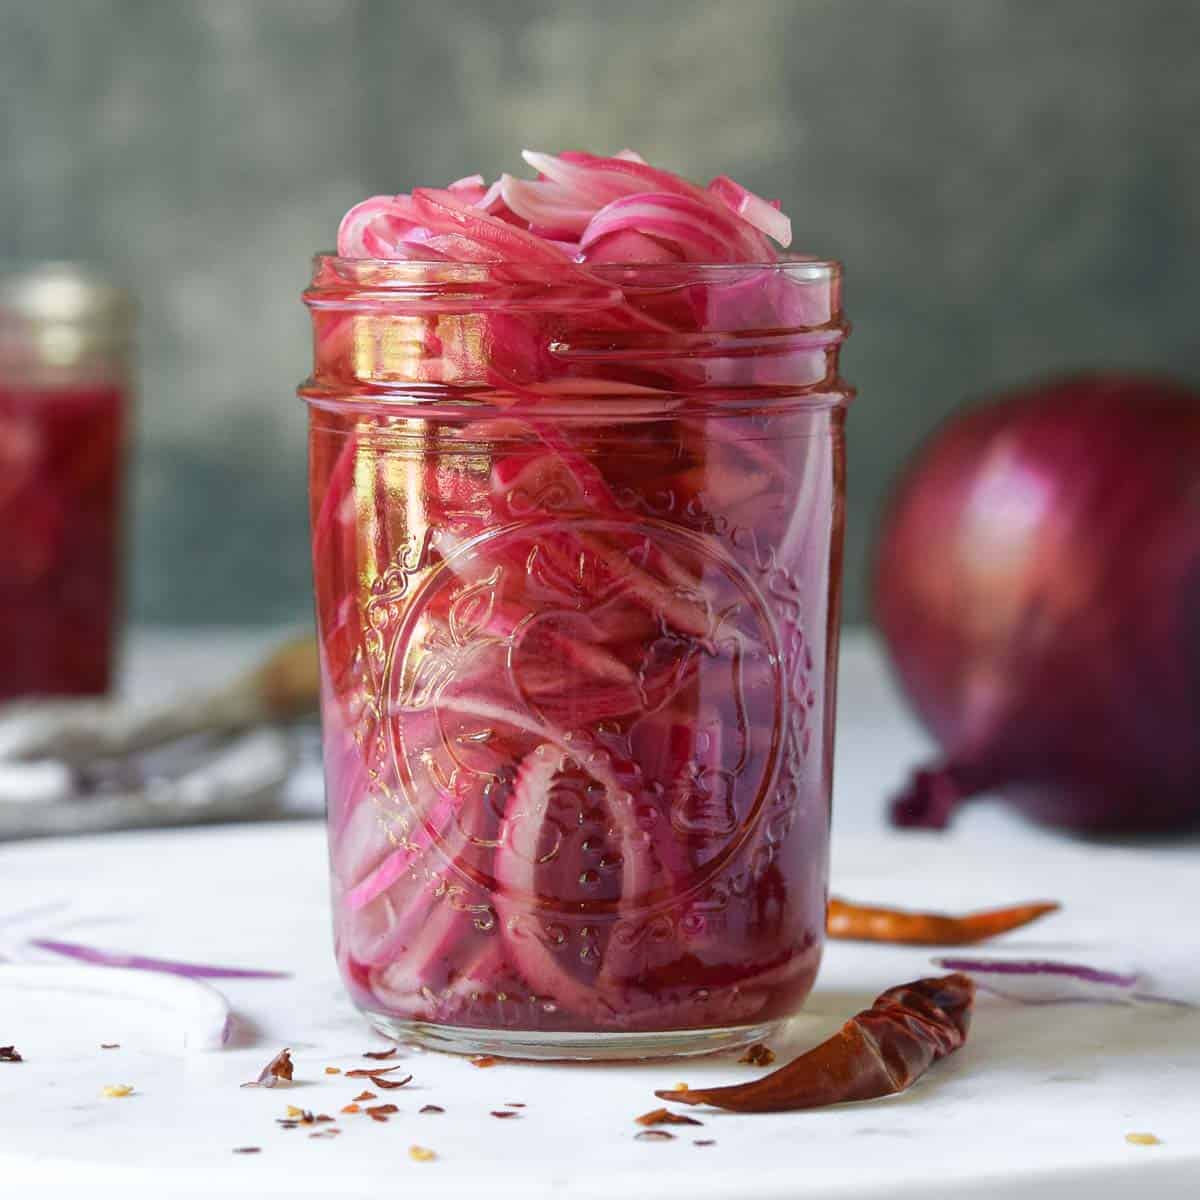 Quick Pickled Spicy Red Wine Onions - Olive Jude